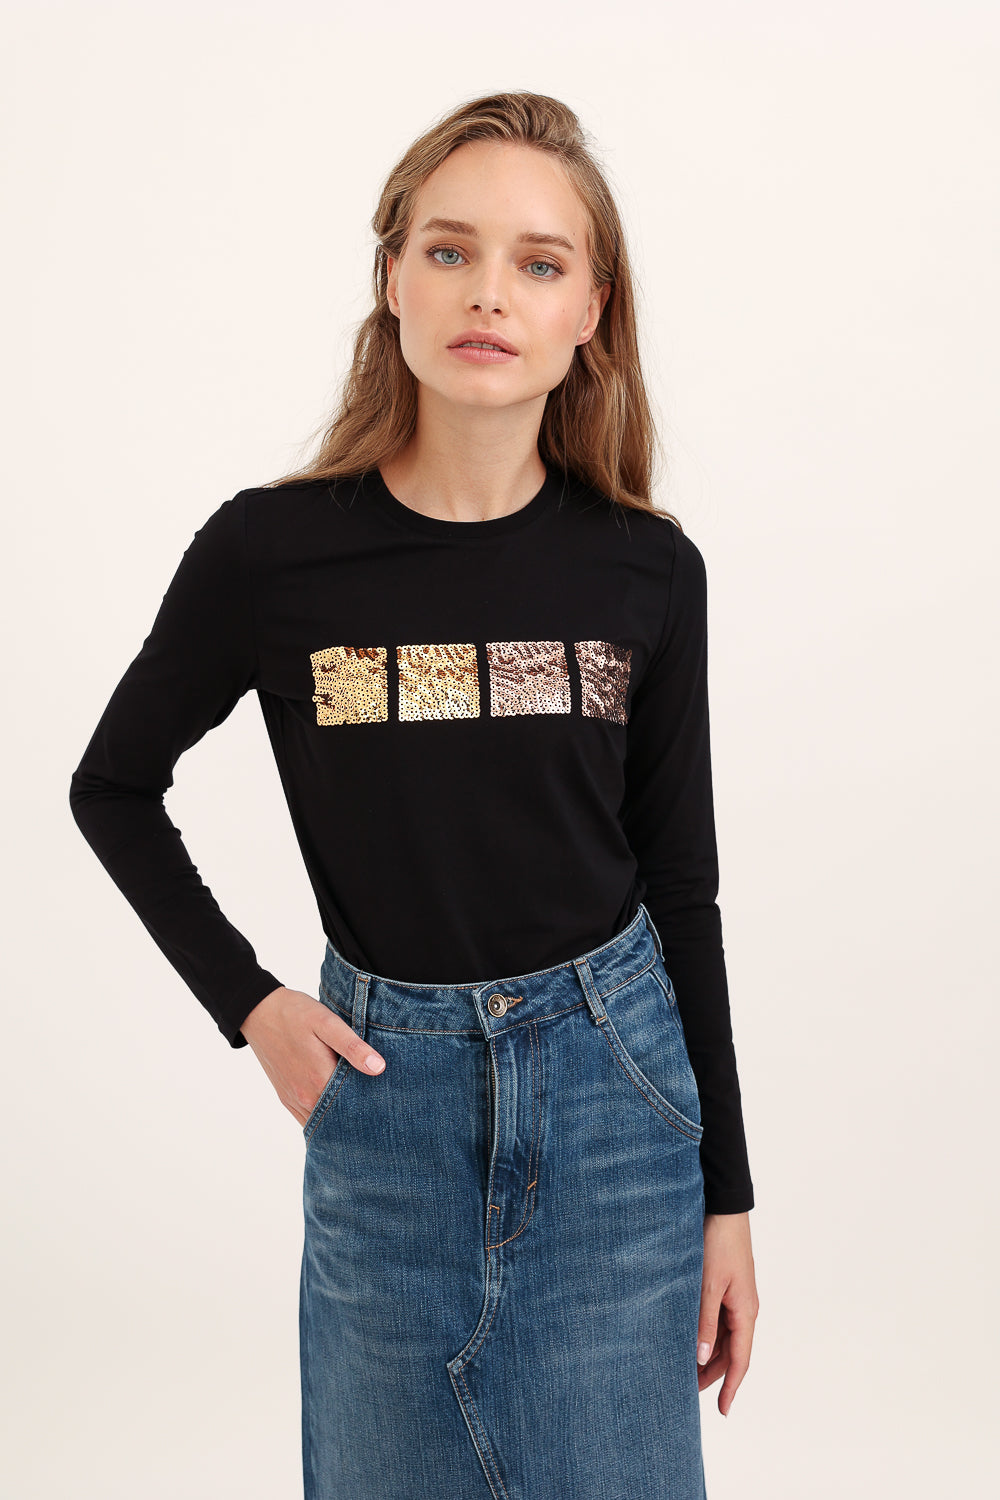 ORD Square Sequins Top - Tops